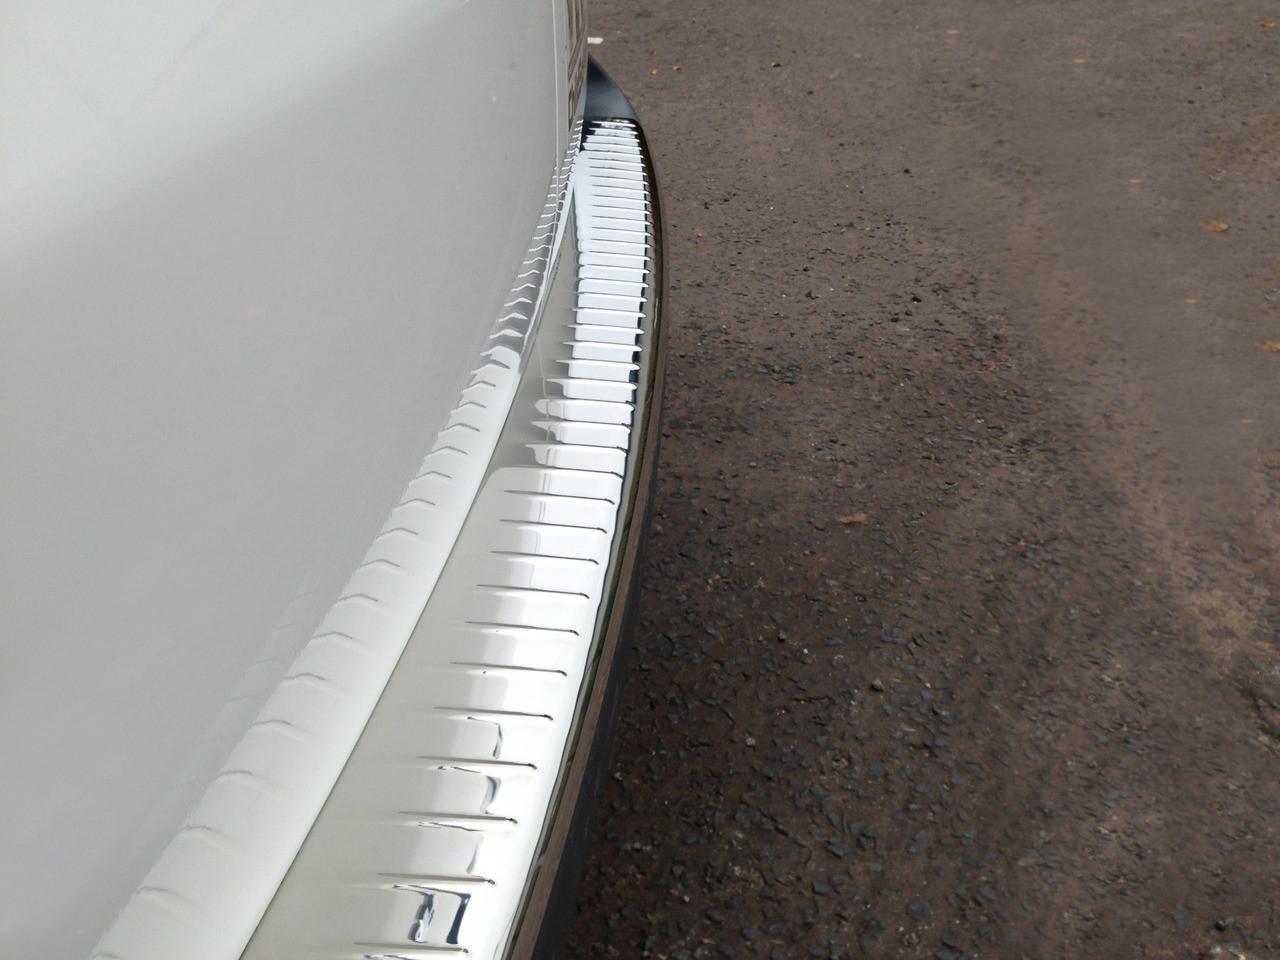 Chrome Bumper Sill Protector Trim Cover To Fit Volkswagen T5 Caravelle (2004-15)